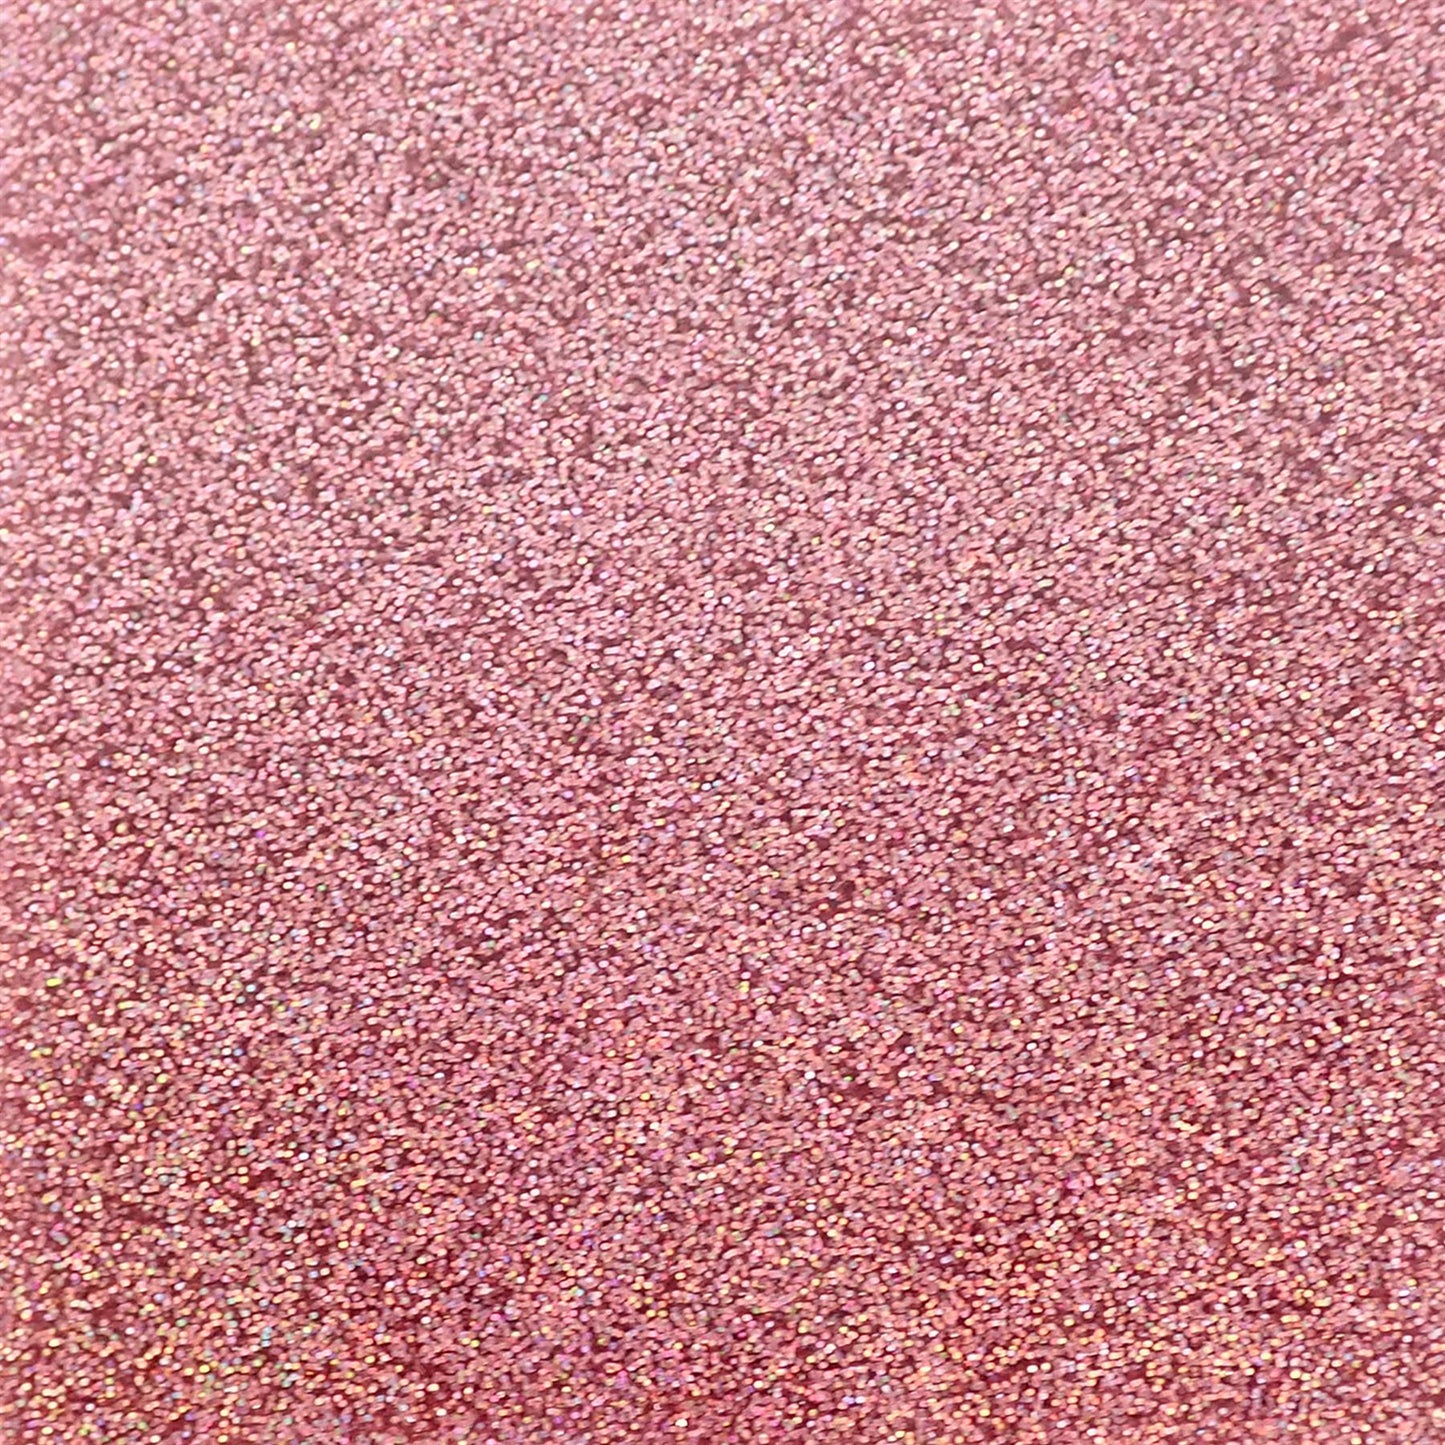 Incudo Golden Pink 2-Sided Holographic Glitter Acrylic Sheet - 300x200x3mm (11.8x7.87x0.12")